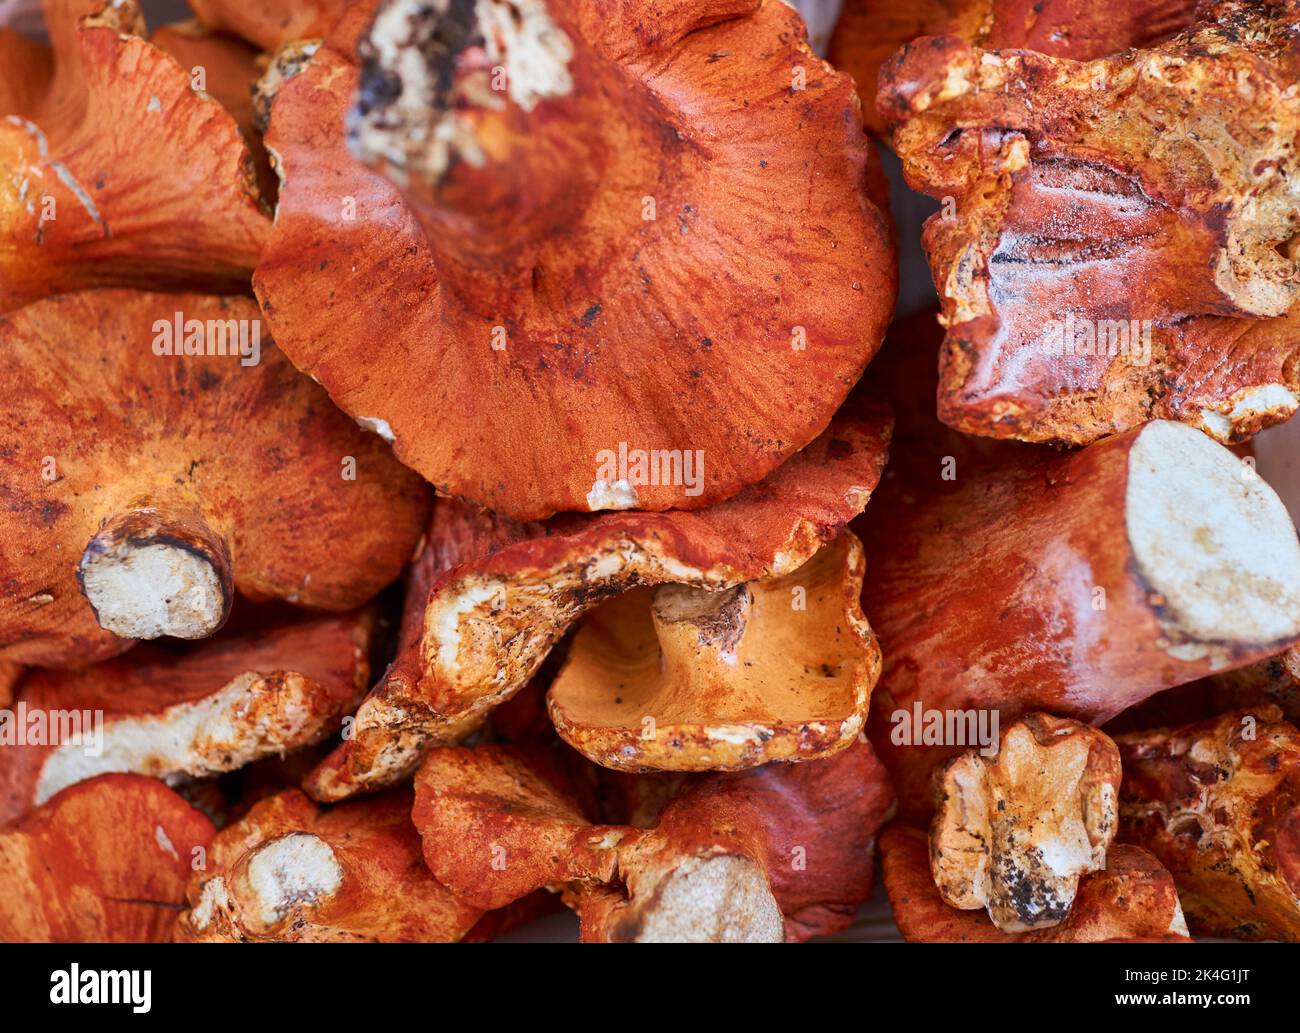 Lobster mushrooms are meaty mushrooms and can be cooked in many ways.  Beautiful orange-yellow color. Organic, foraged from the forests of NJ, USA Stock Photo